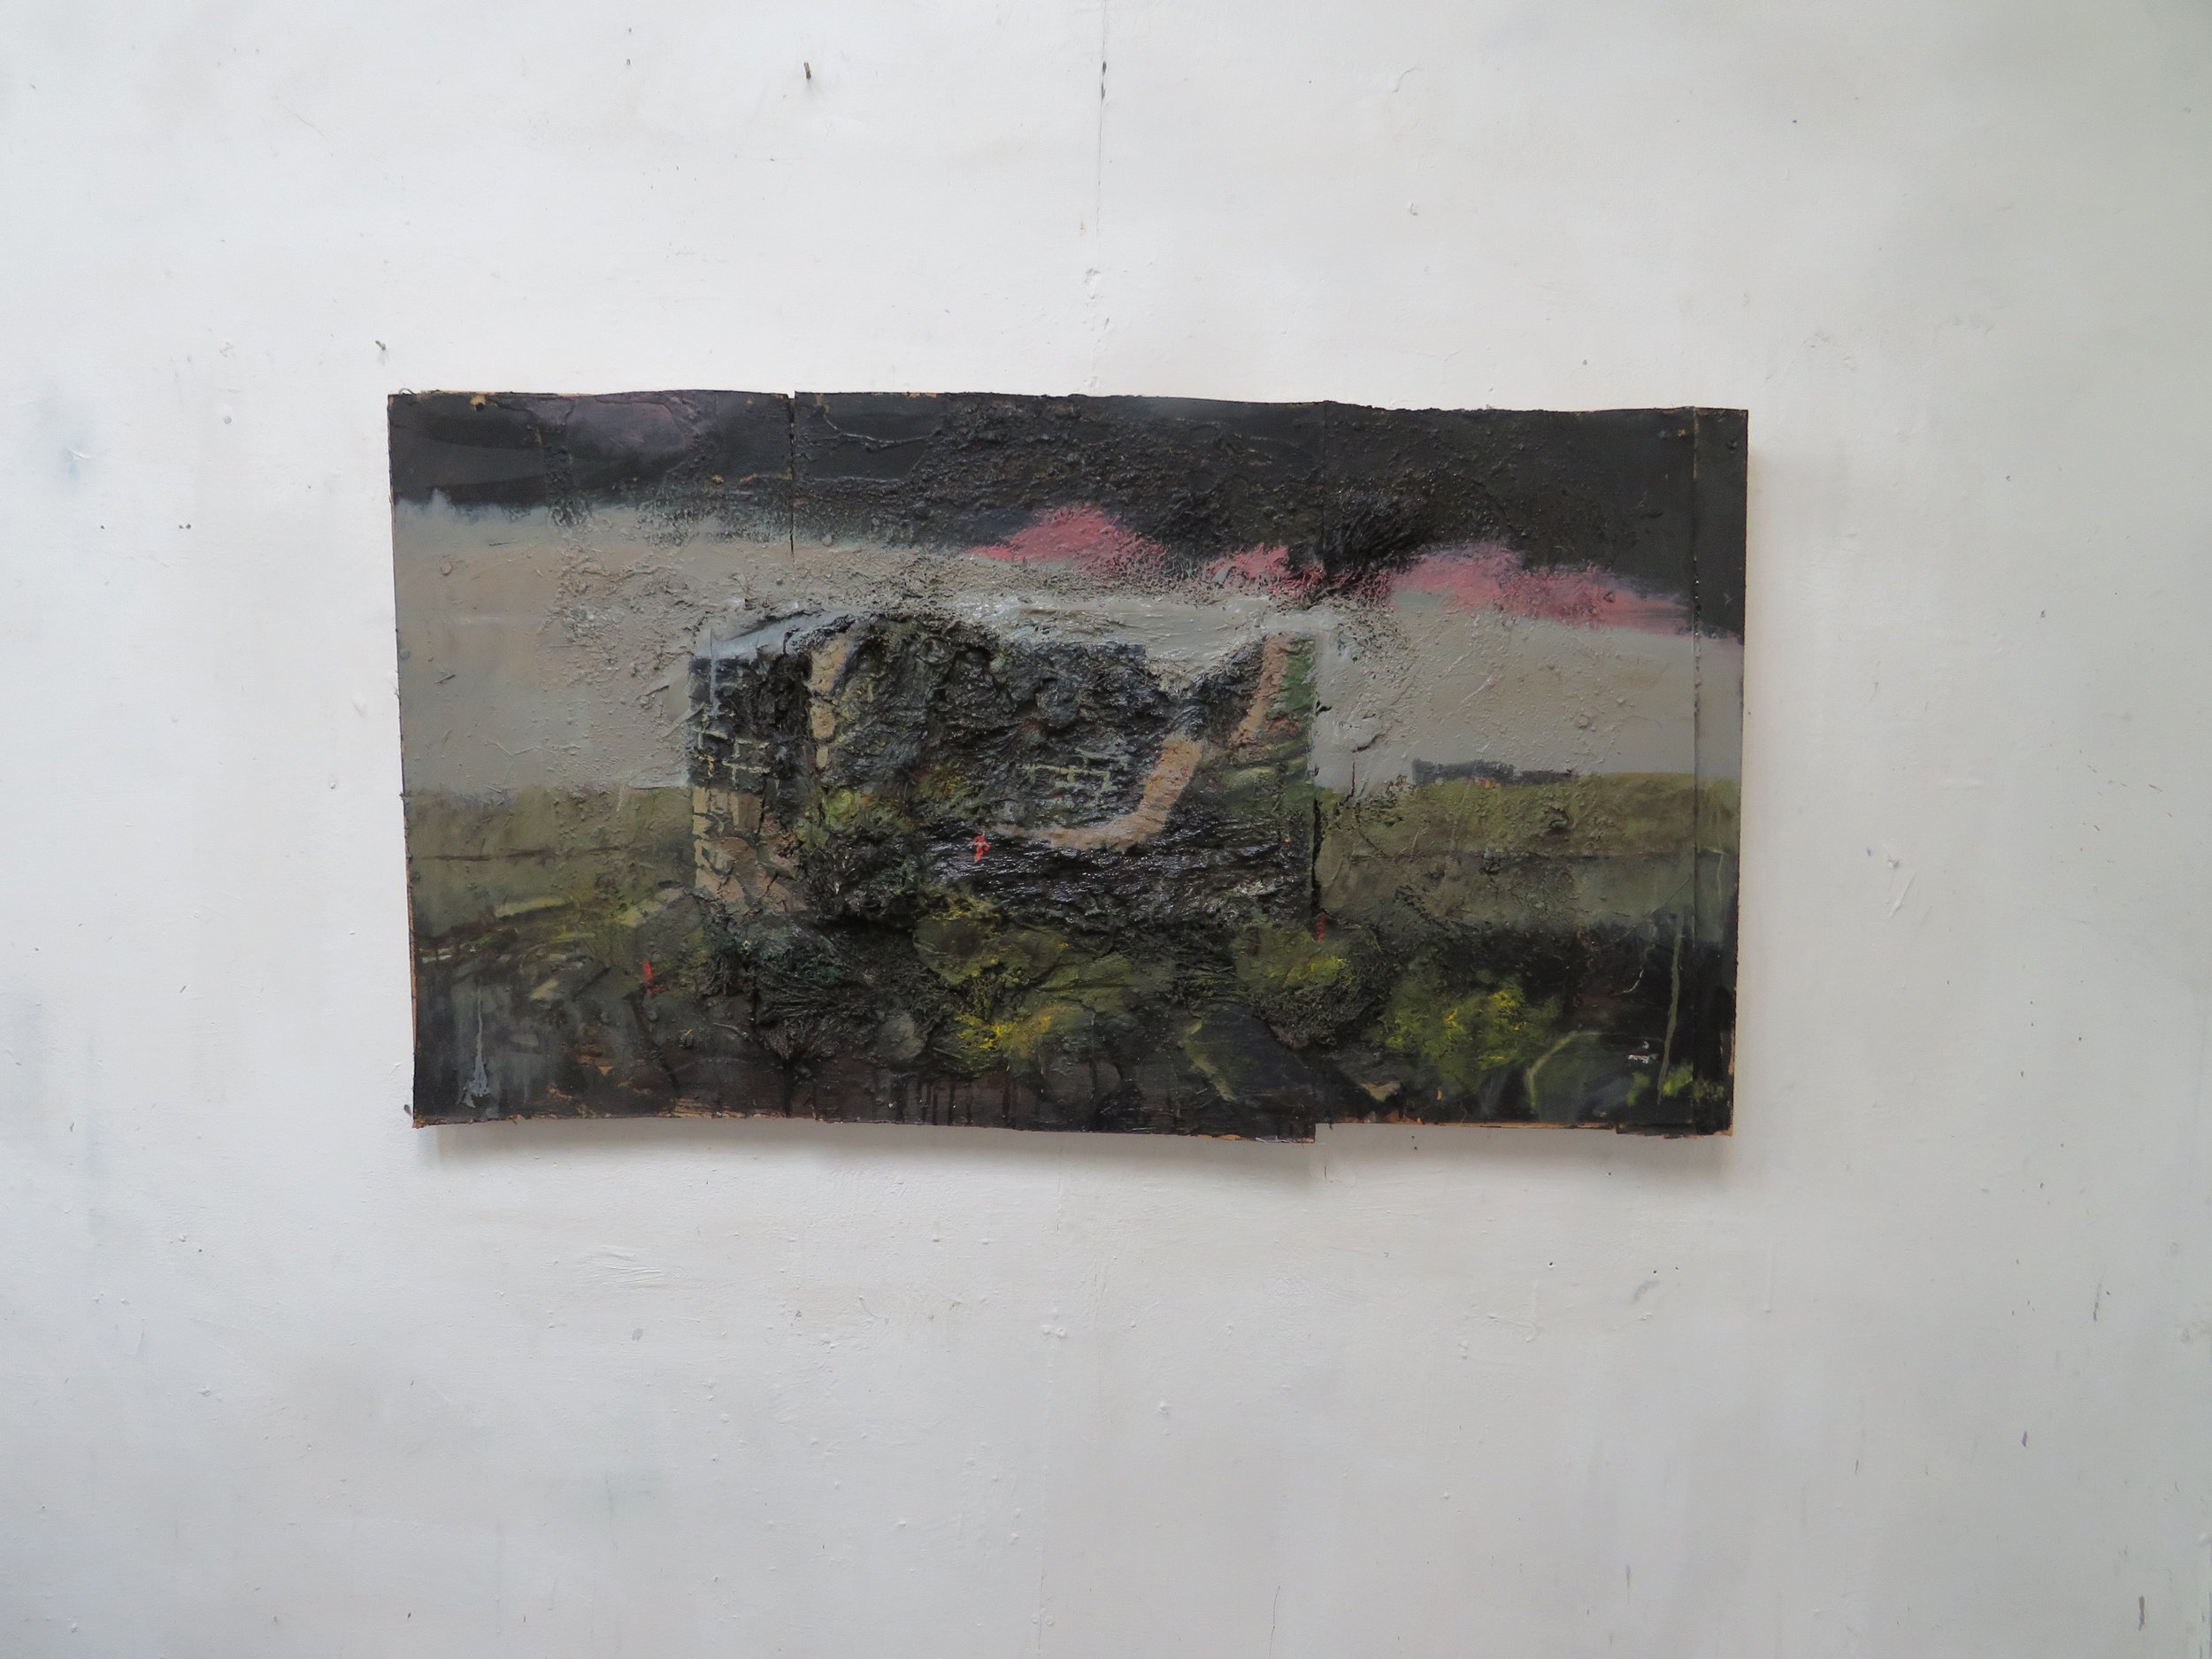 Search llght Building, Ruin 79 x 138 cms